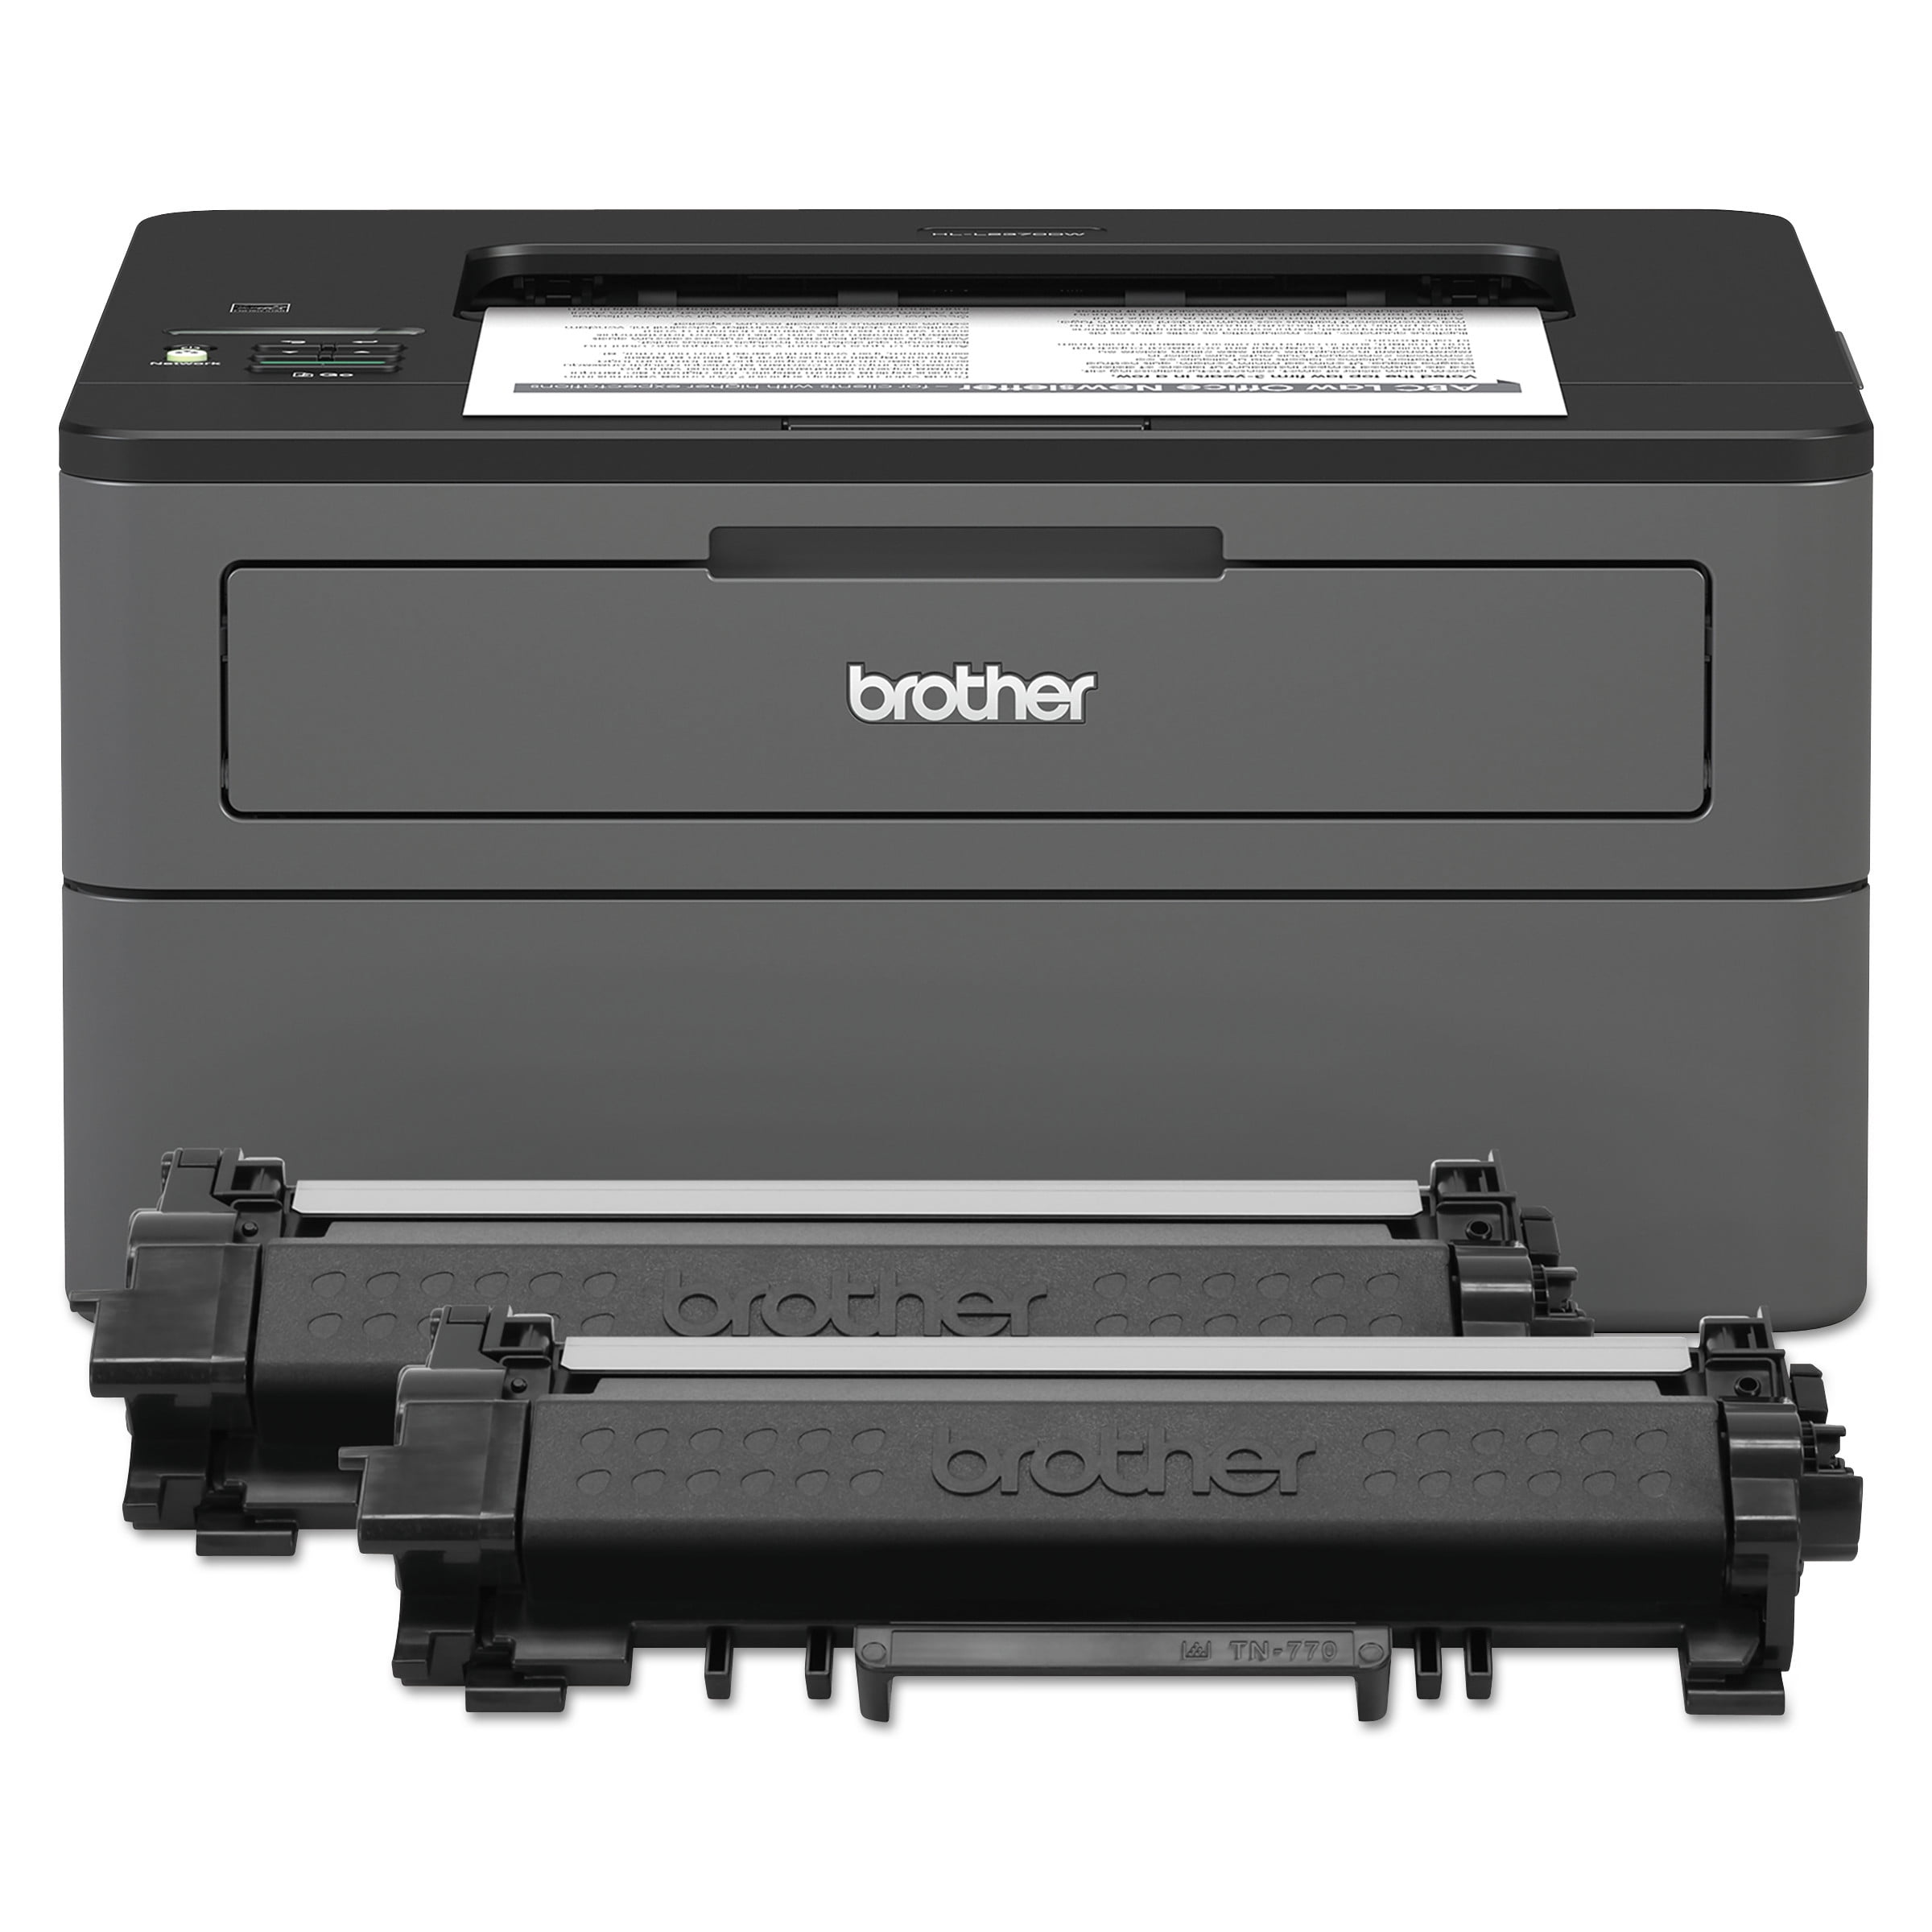 Brother XL Extended Print Laser Printer, up to 2 of Toner In-Box - Walmart.com